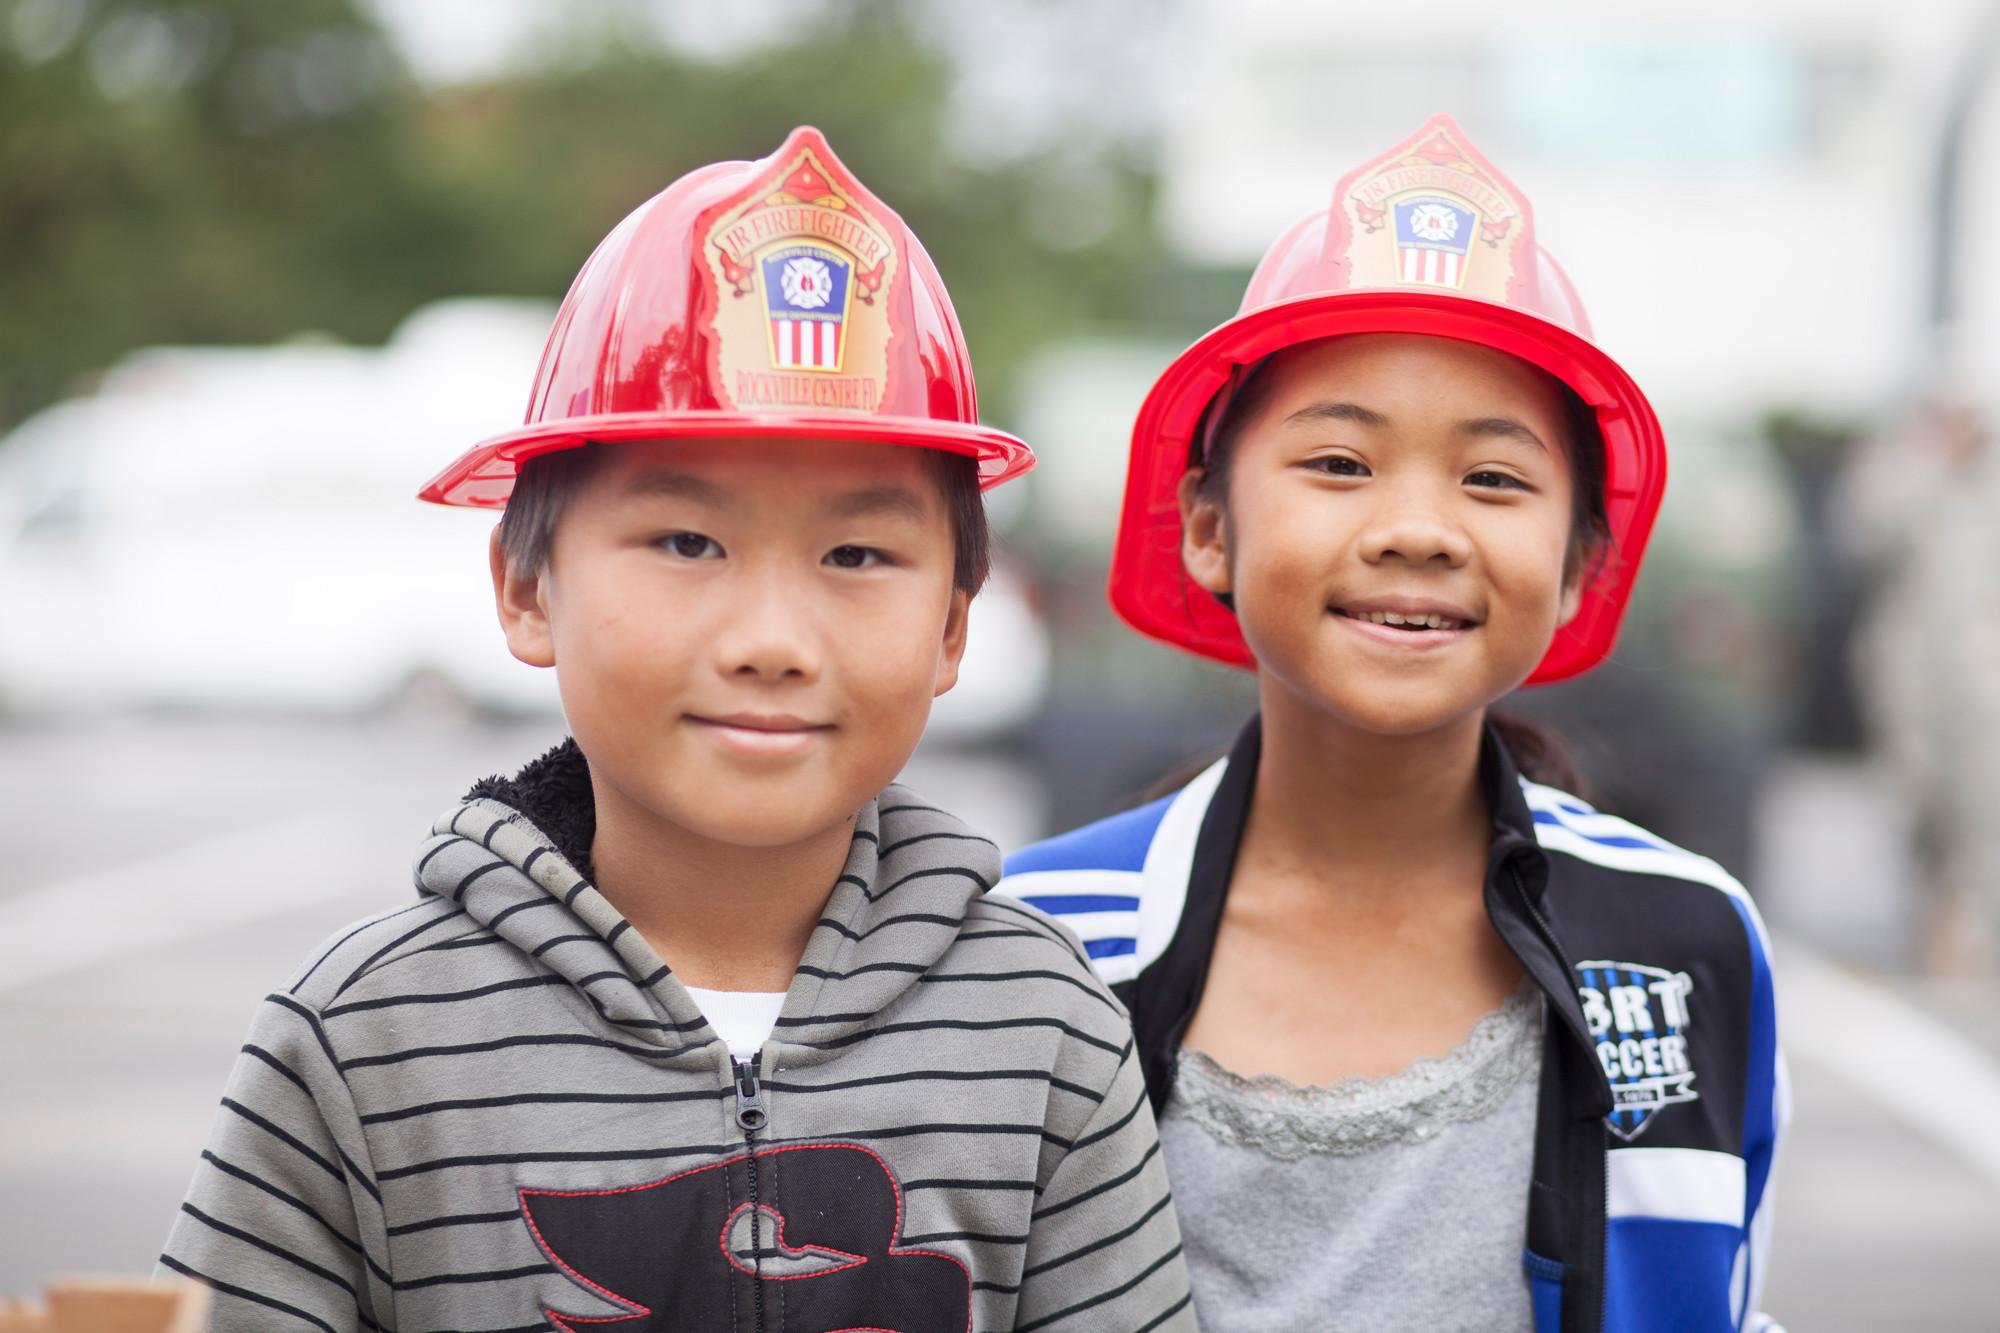 Joey and Valerie Hoffer showed their community spirt in with their official Rockville Centre Junior Firefighter hats.